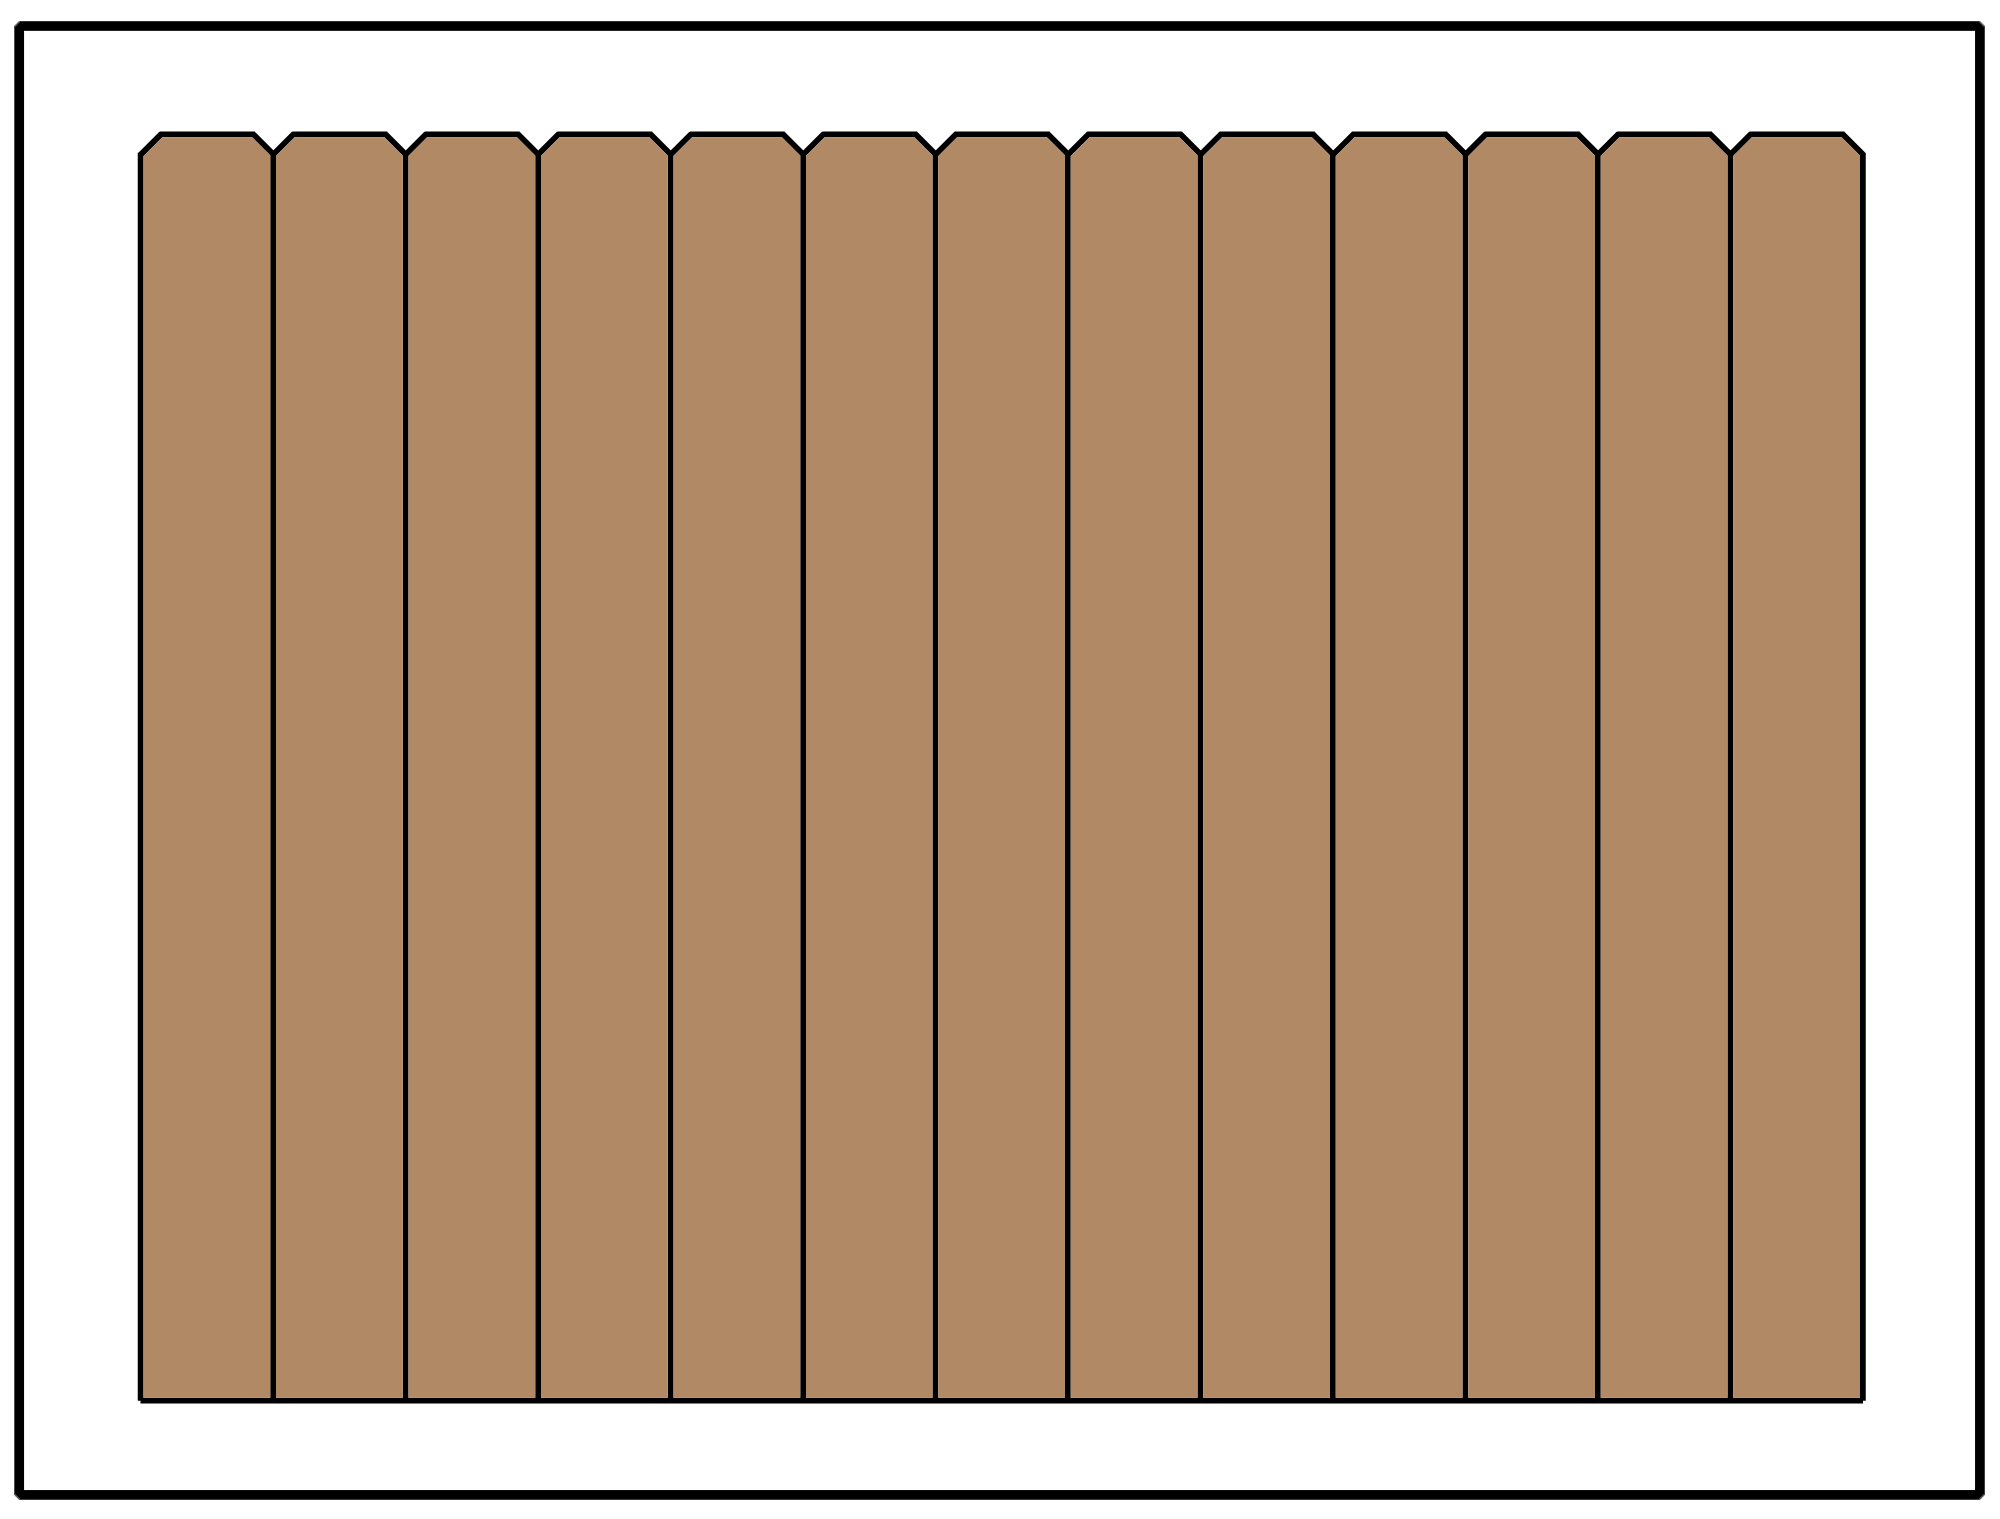 Illustration of a privacy fence using a dog ear picket